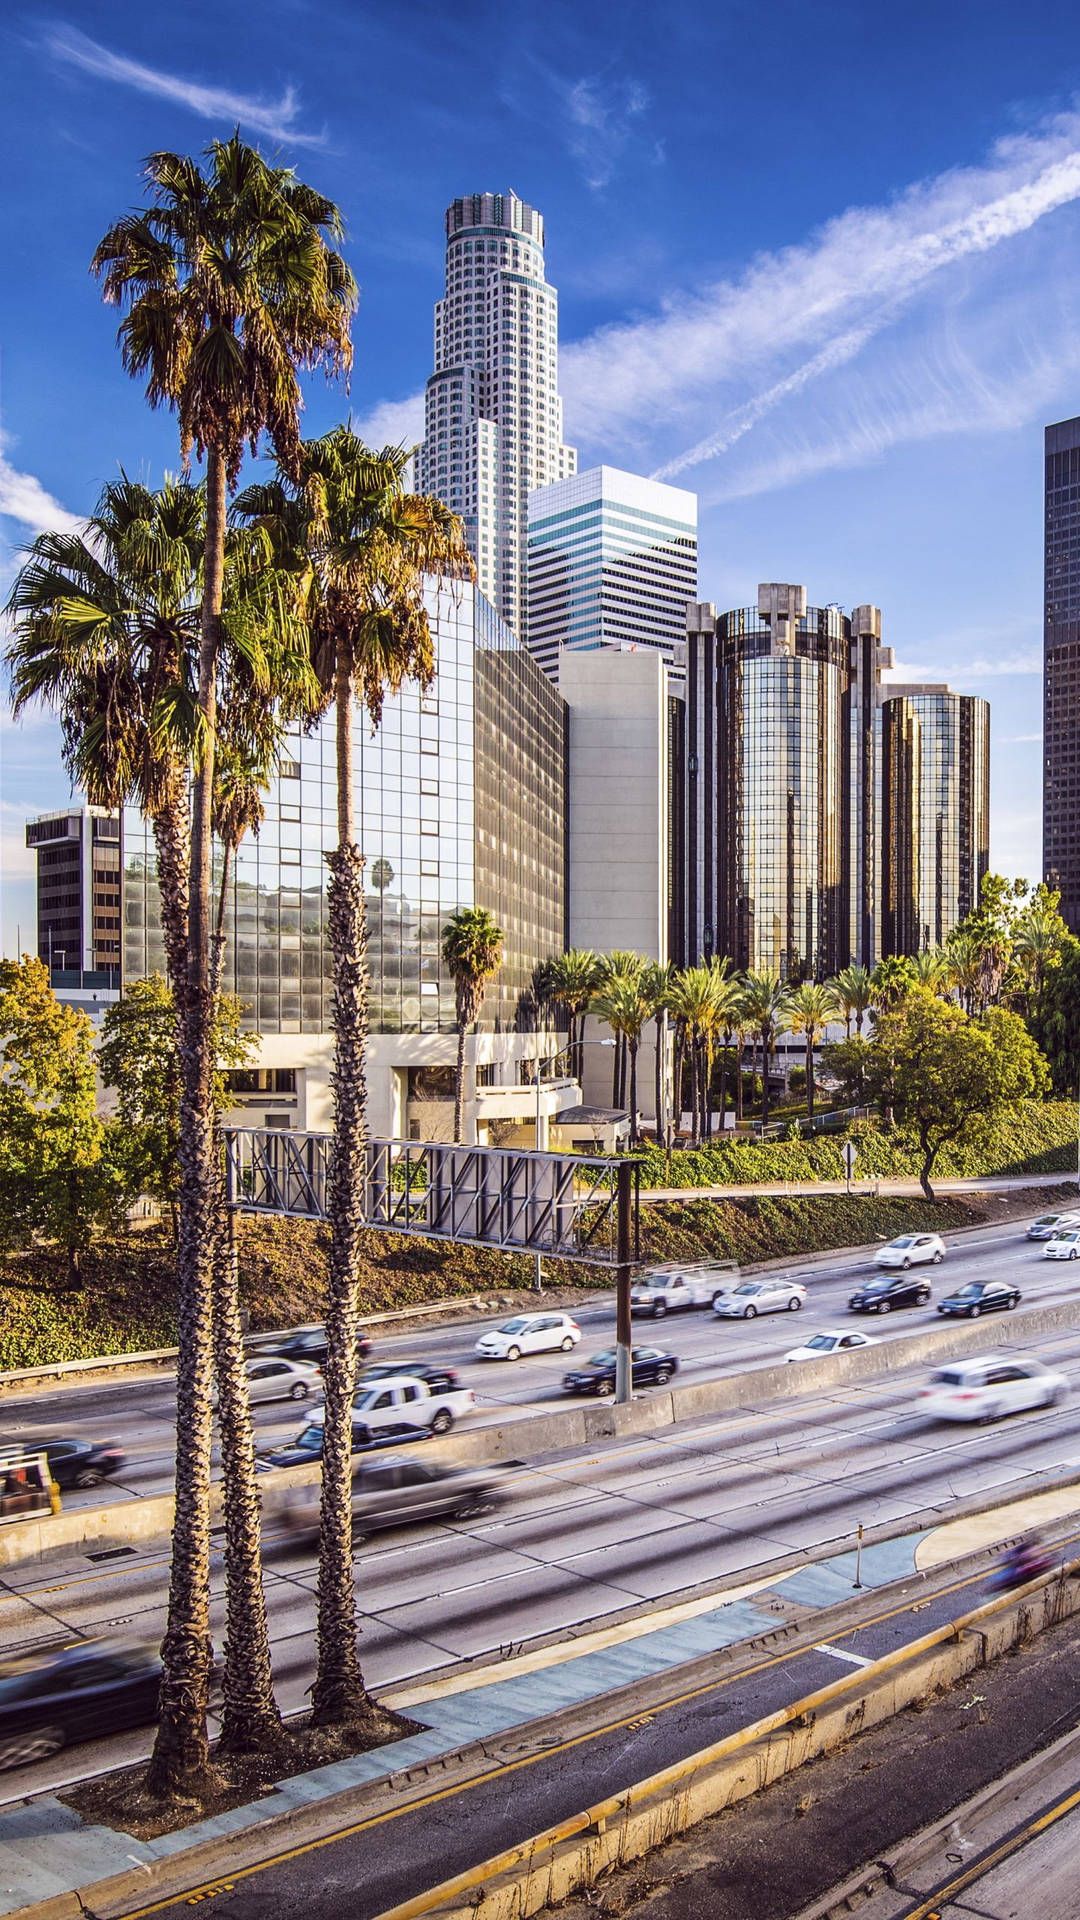 A city street with palm trees and tall buildings - Los Angeles